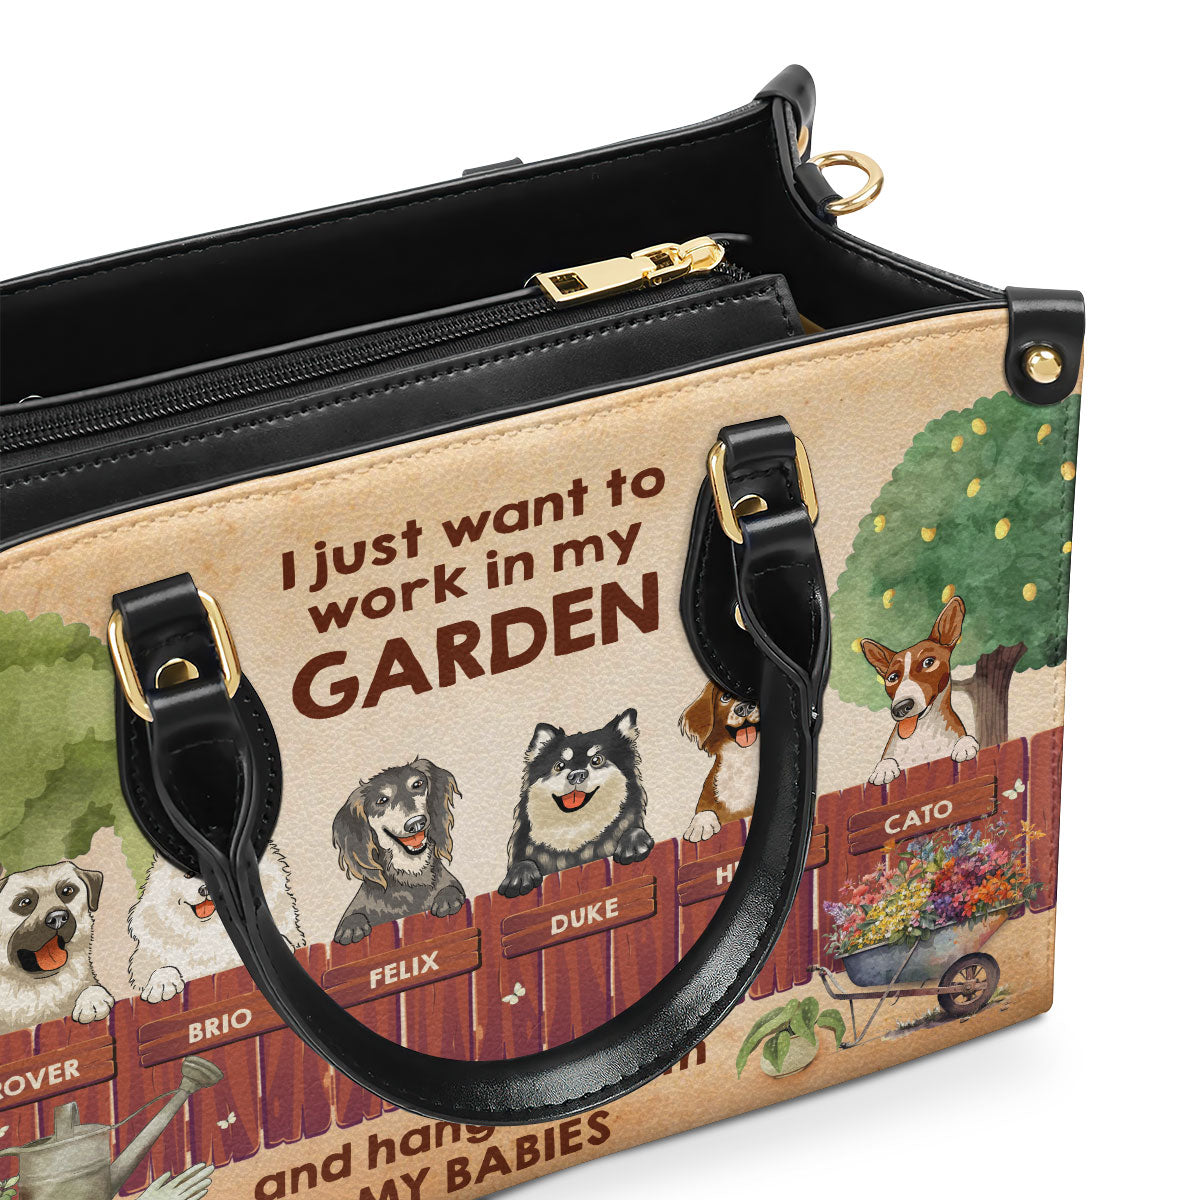 I Just Want To Work In My Garden And Hangout With My Babies - Personalized Leather Handbag STB184